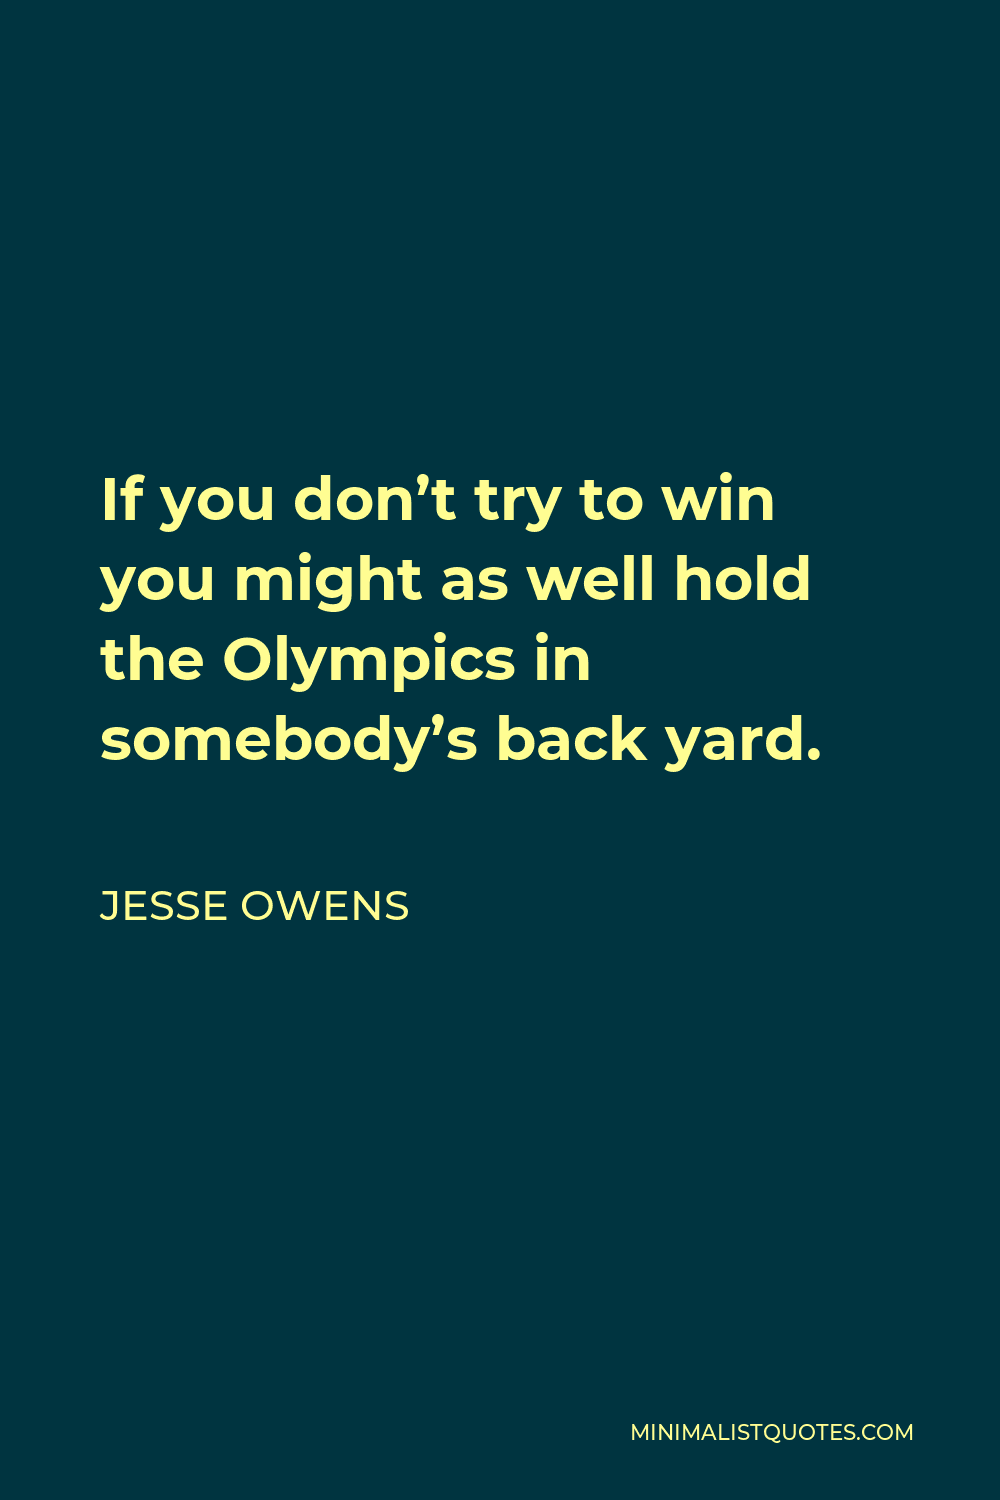 Jesse Owens Quote - If you don’t try to win you might as well hold the Olympics in somebody’s back yard. The thrill of competing carries with it the thrill of a gold medal. One wants to win to prove himself the best.